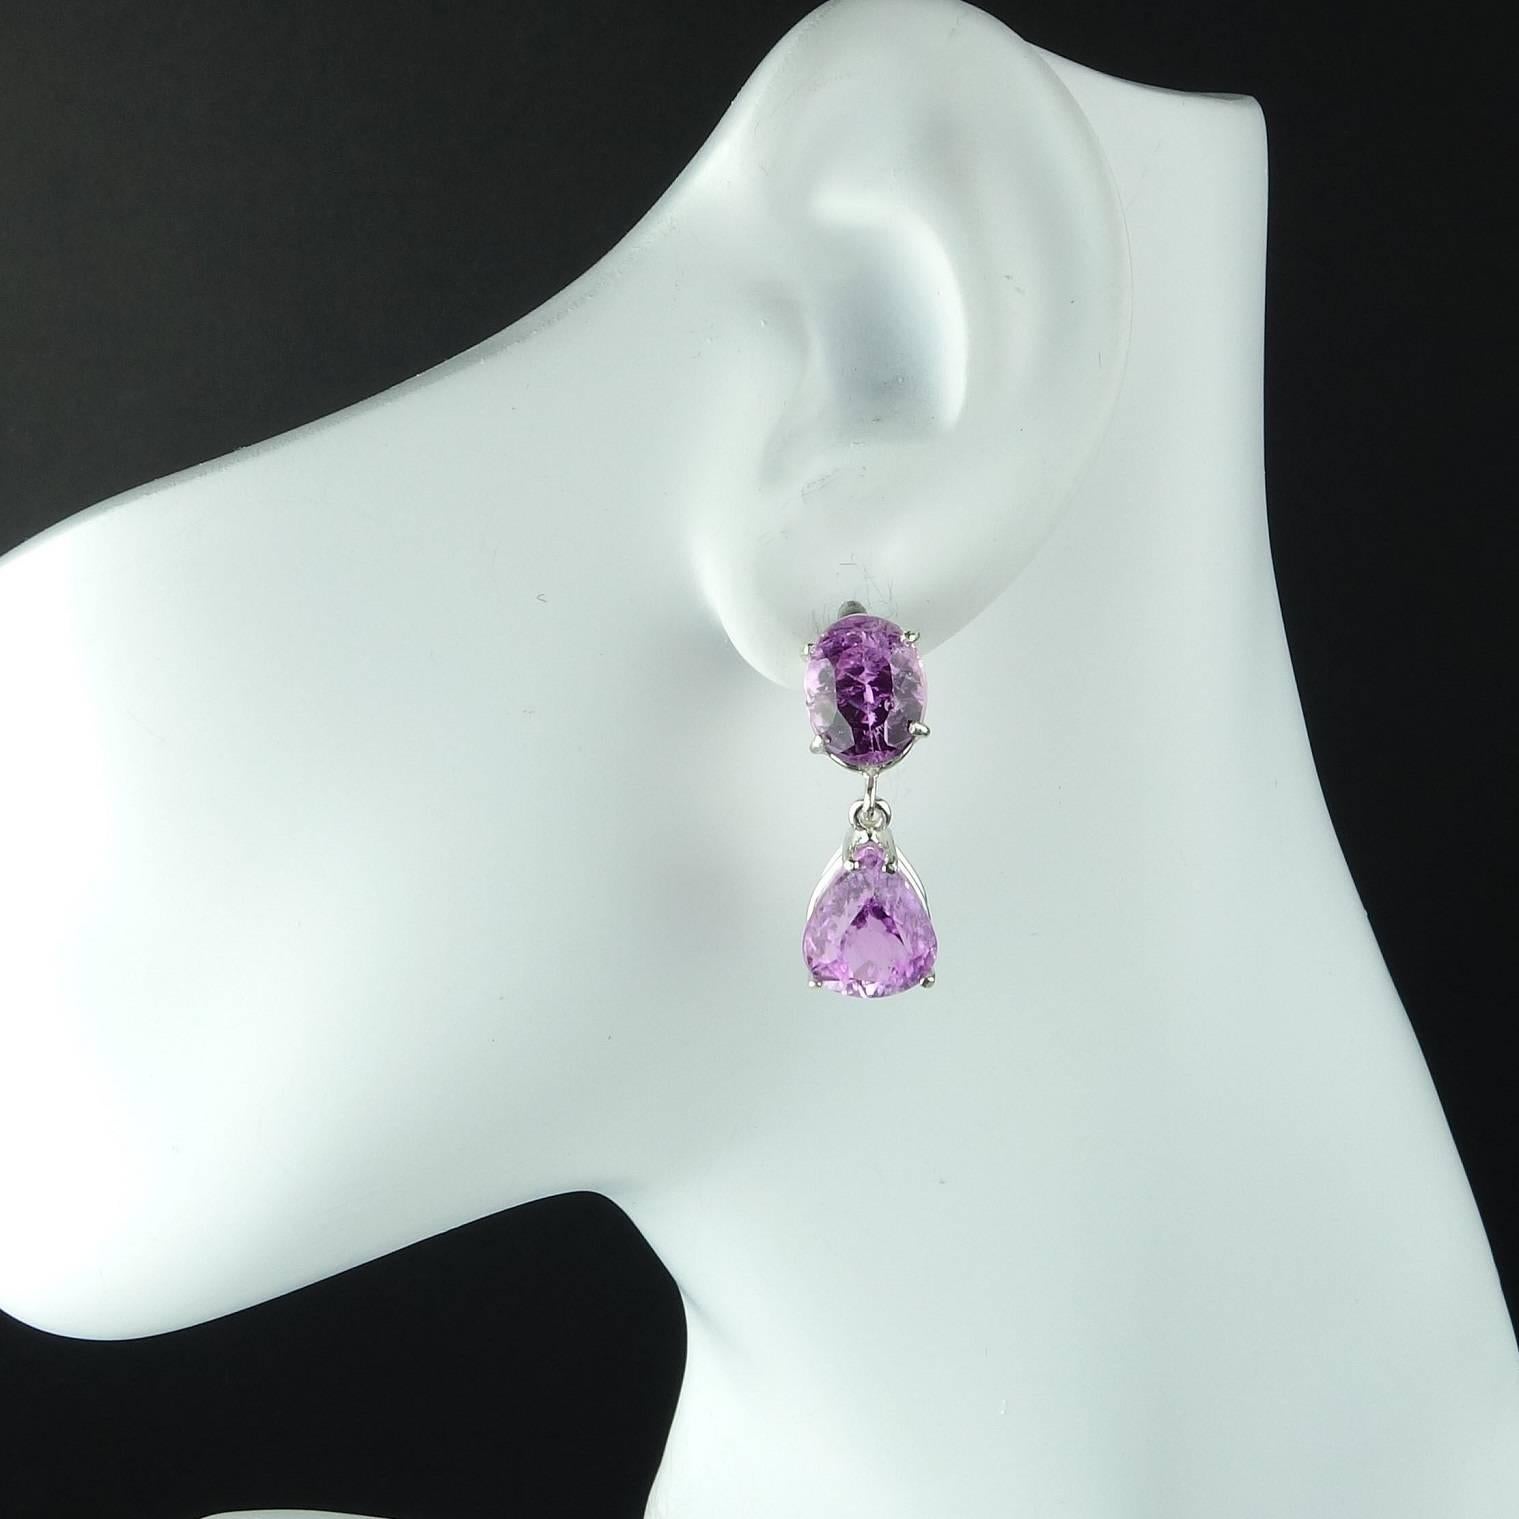 Brazilian Kunzite in oval and pear shapes creating stunning custom made earrings. These sparkling gemstones are set in Sterling Silver and feature post backs. The total weight of gemstones is approximately 21.26 carats. These unique beauties come